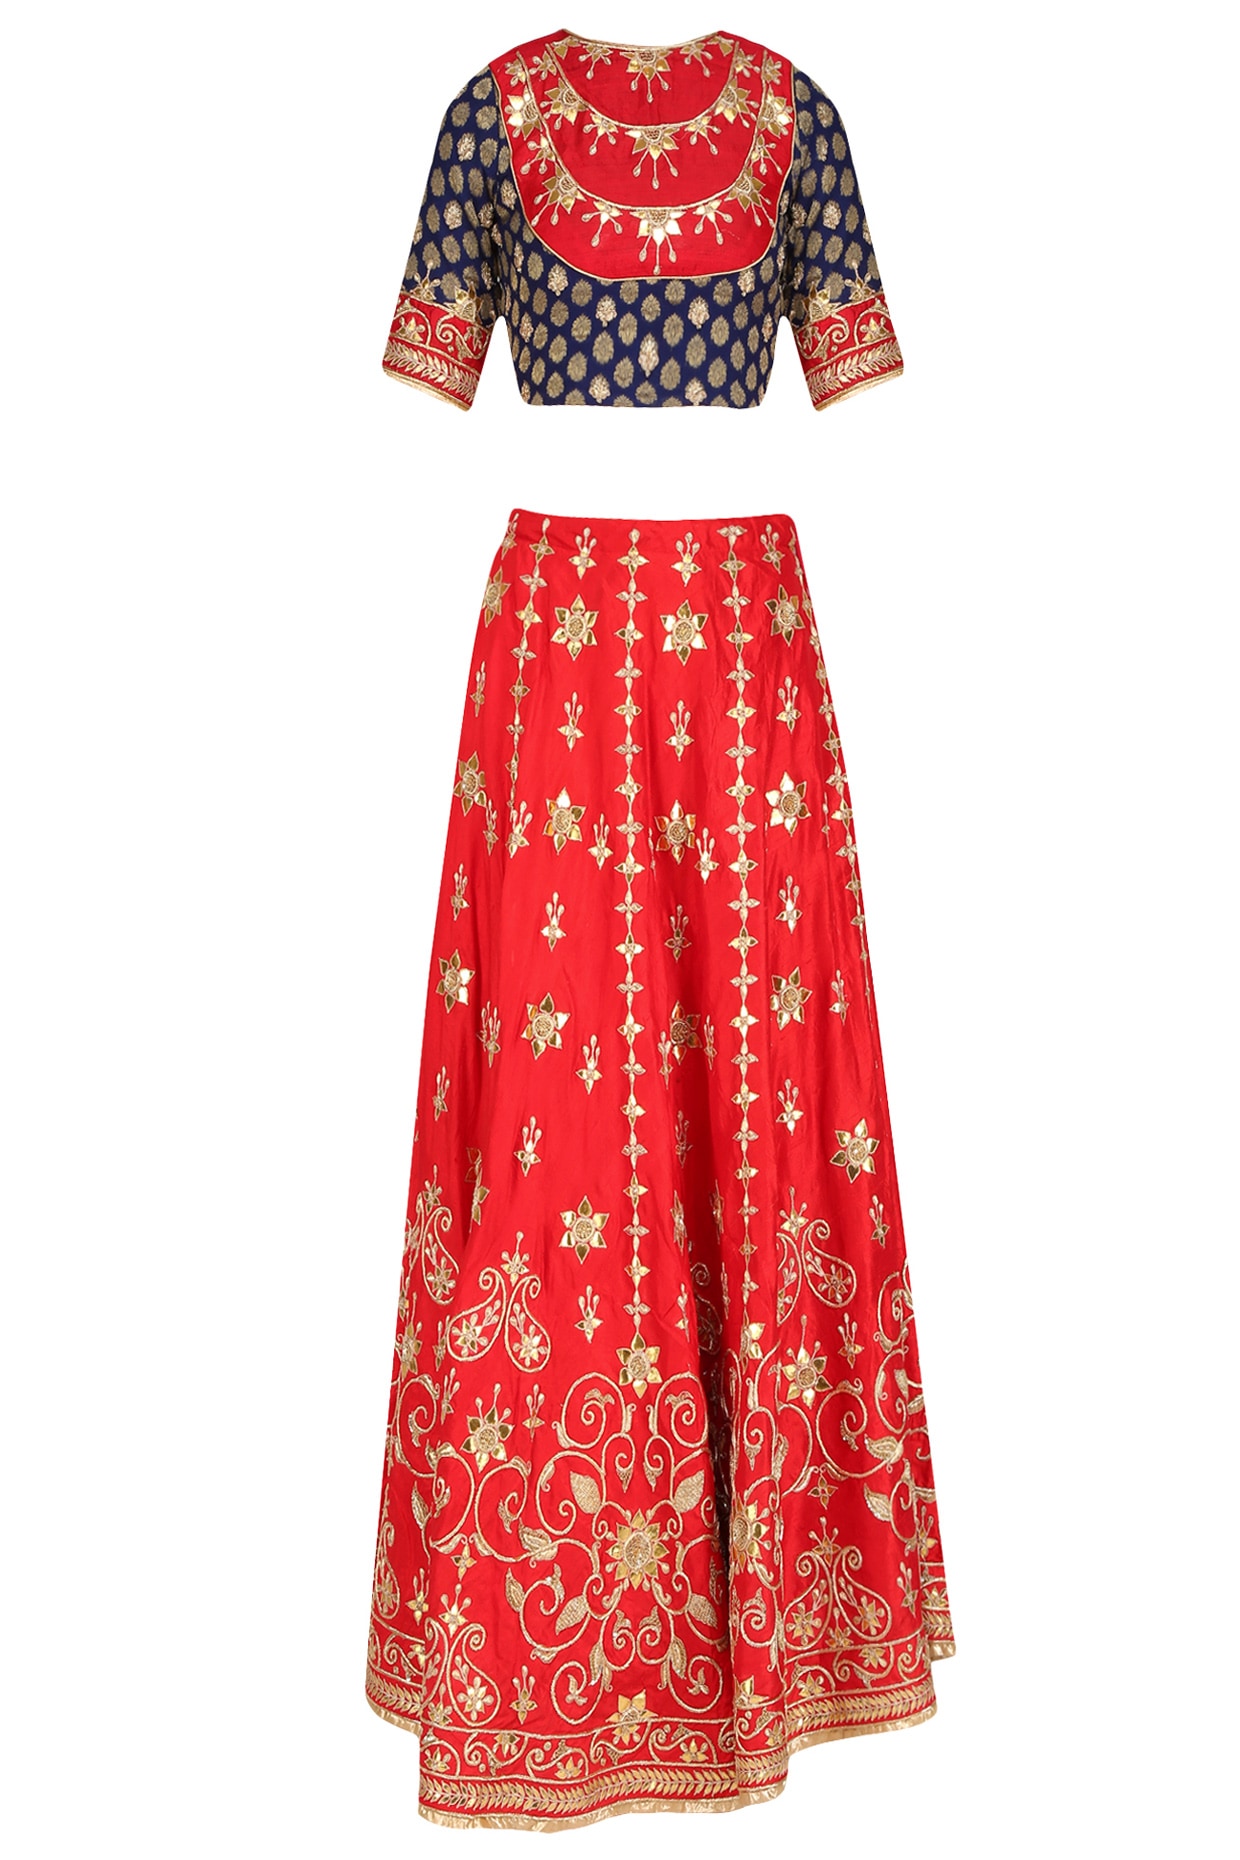 Mitera Red & Navy Blue Woven Design Semi-Stitched Lehenga & Unstitched  Blouse with Dupatta - Absolutely Desi